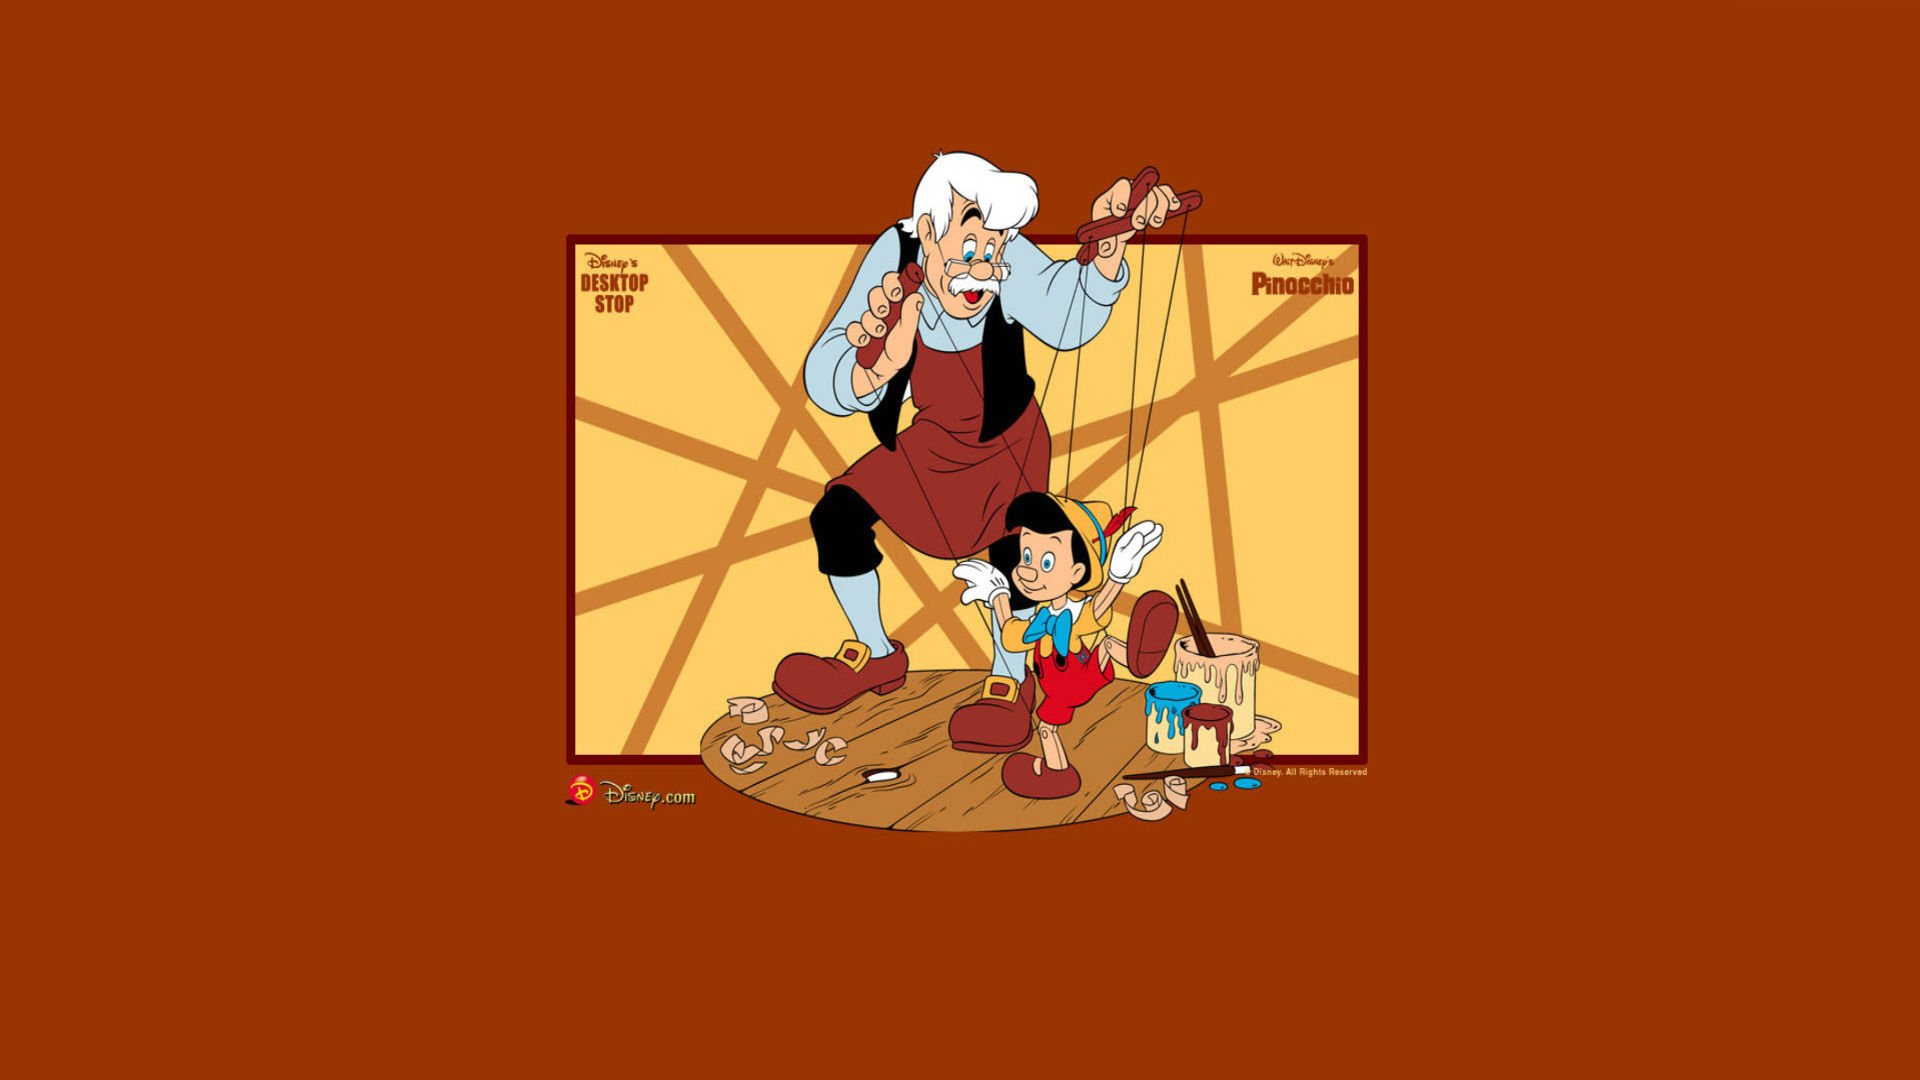 pinocchio, Puppet, Disney, Comedy, Family, Animation, Fantasy, 1pinocchio, Wood, Wooden, Marionette Wallpaper